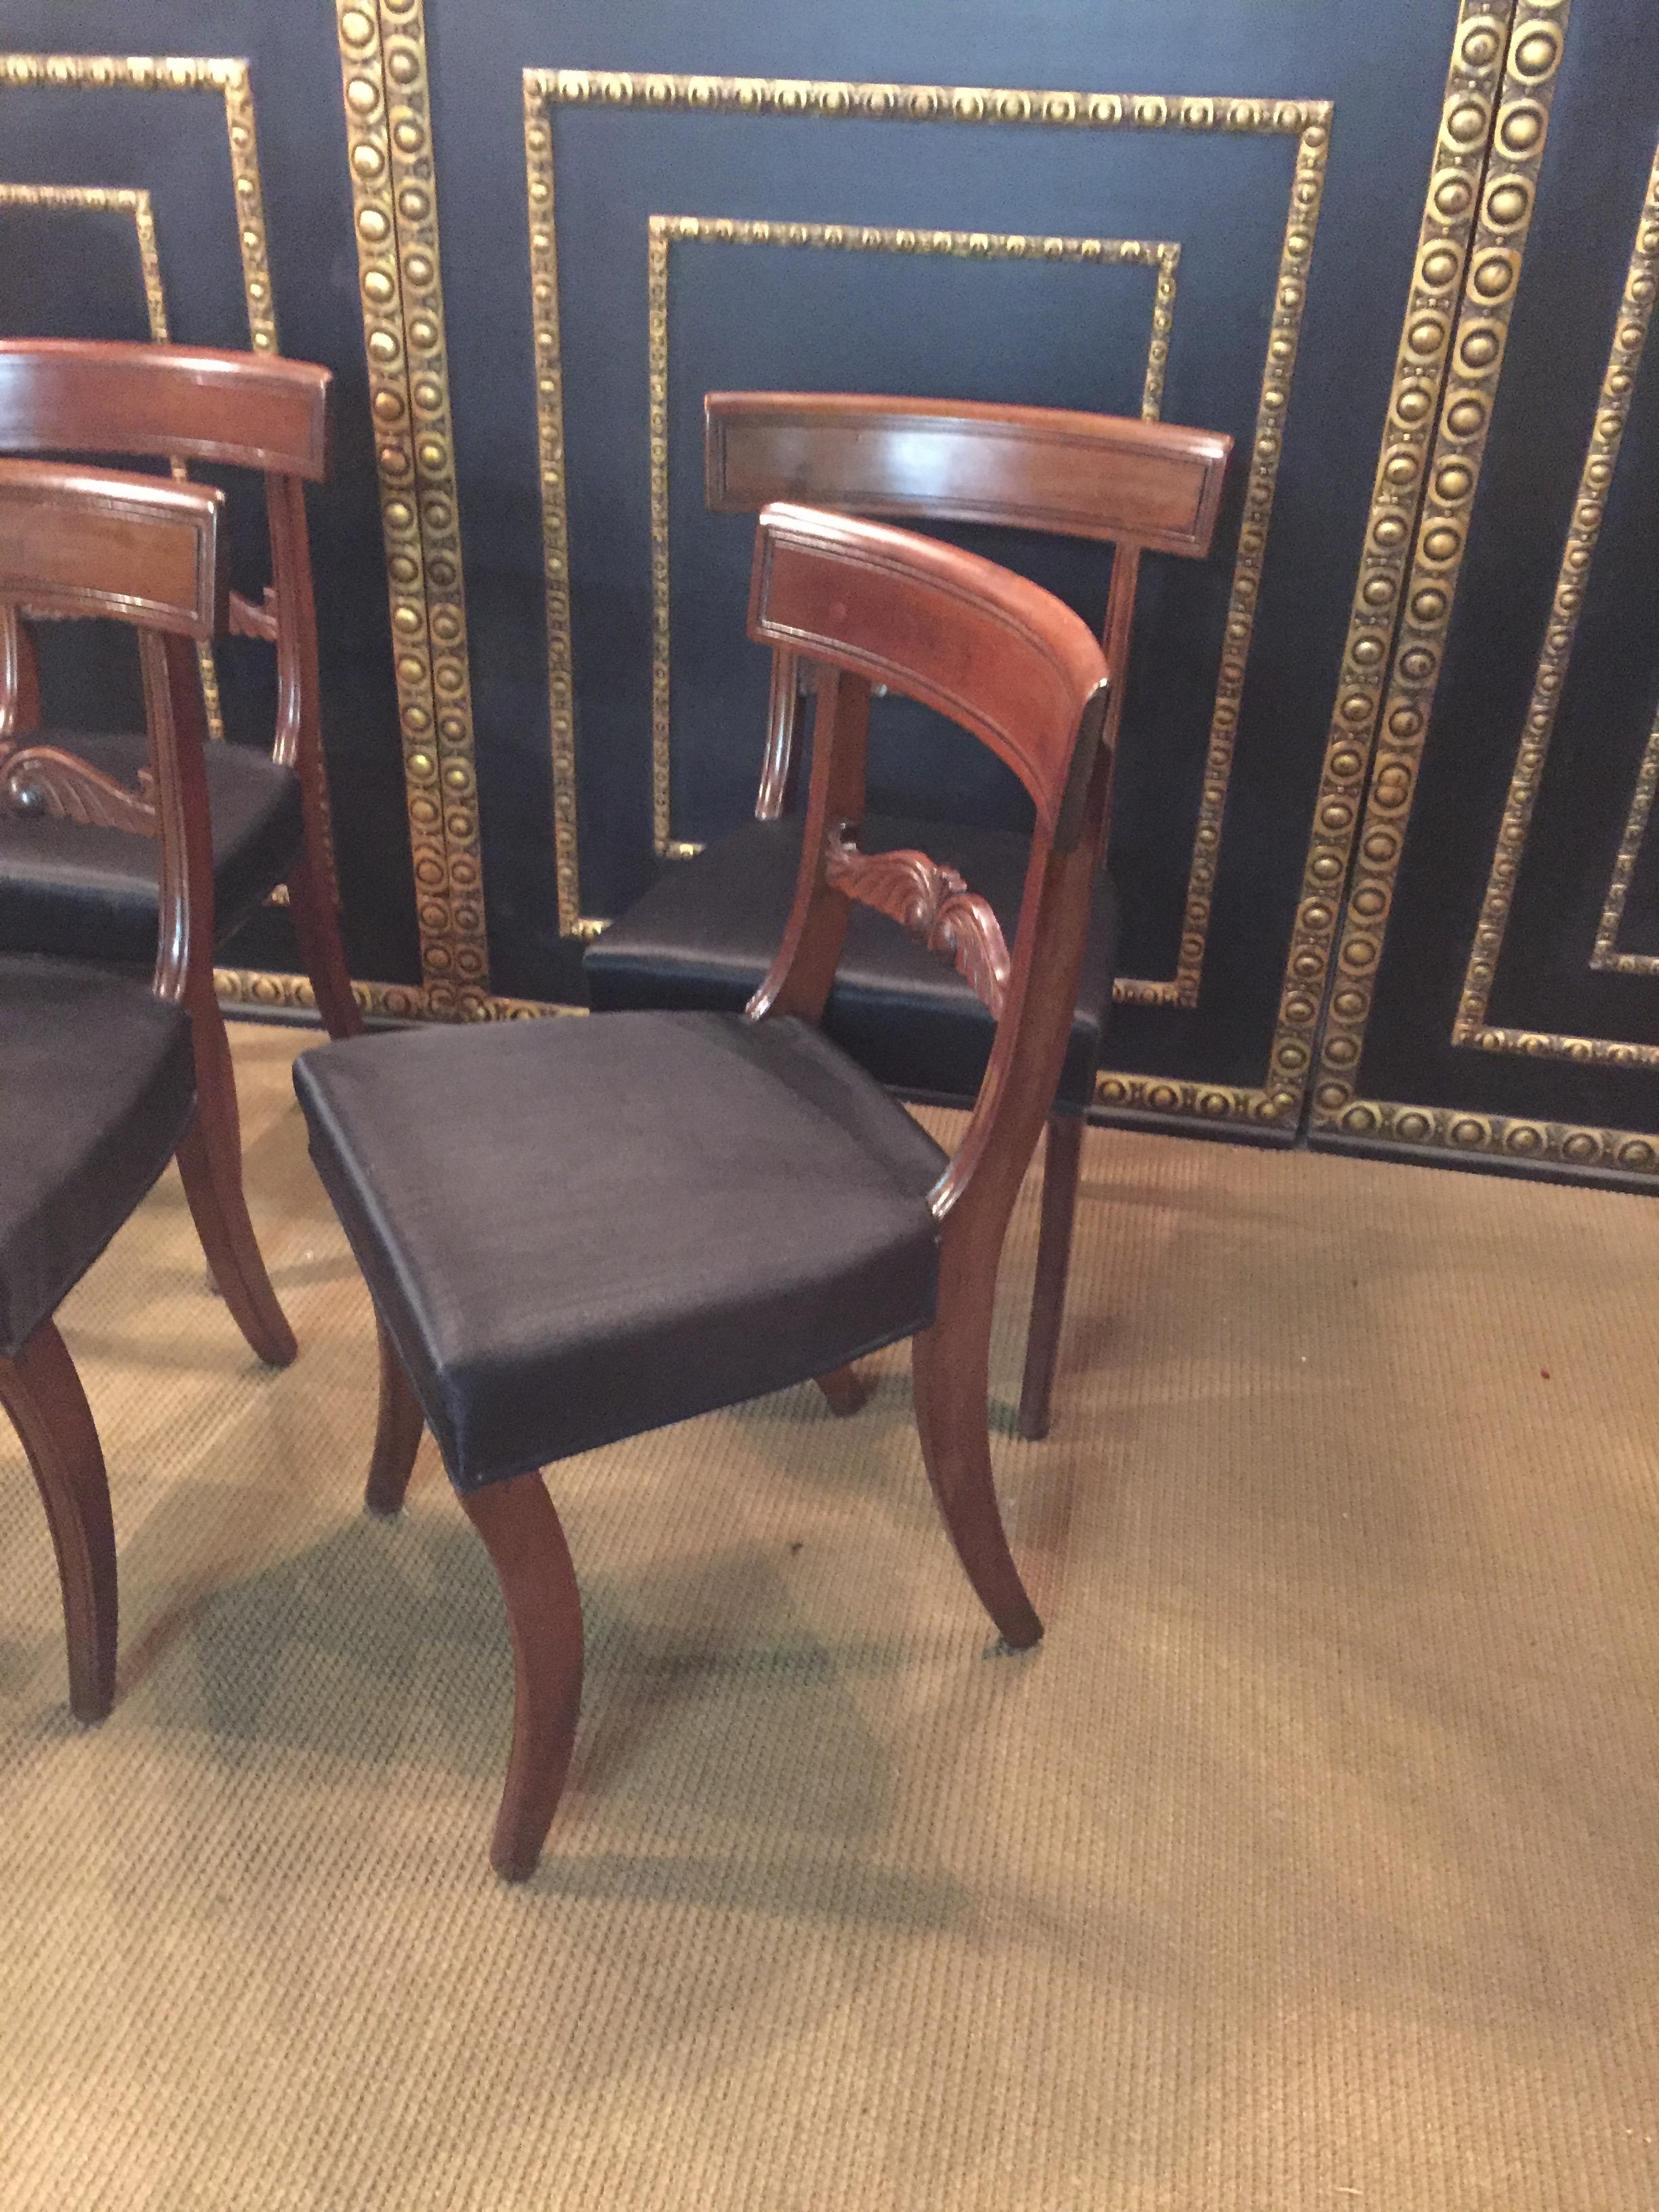 19th Century 4 Biedermeier Saber-Legs Chairs Are Solid Mahogany 1